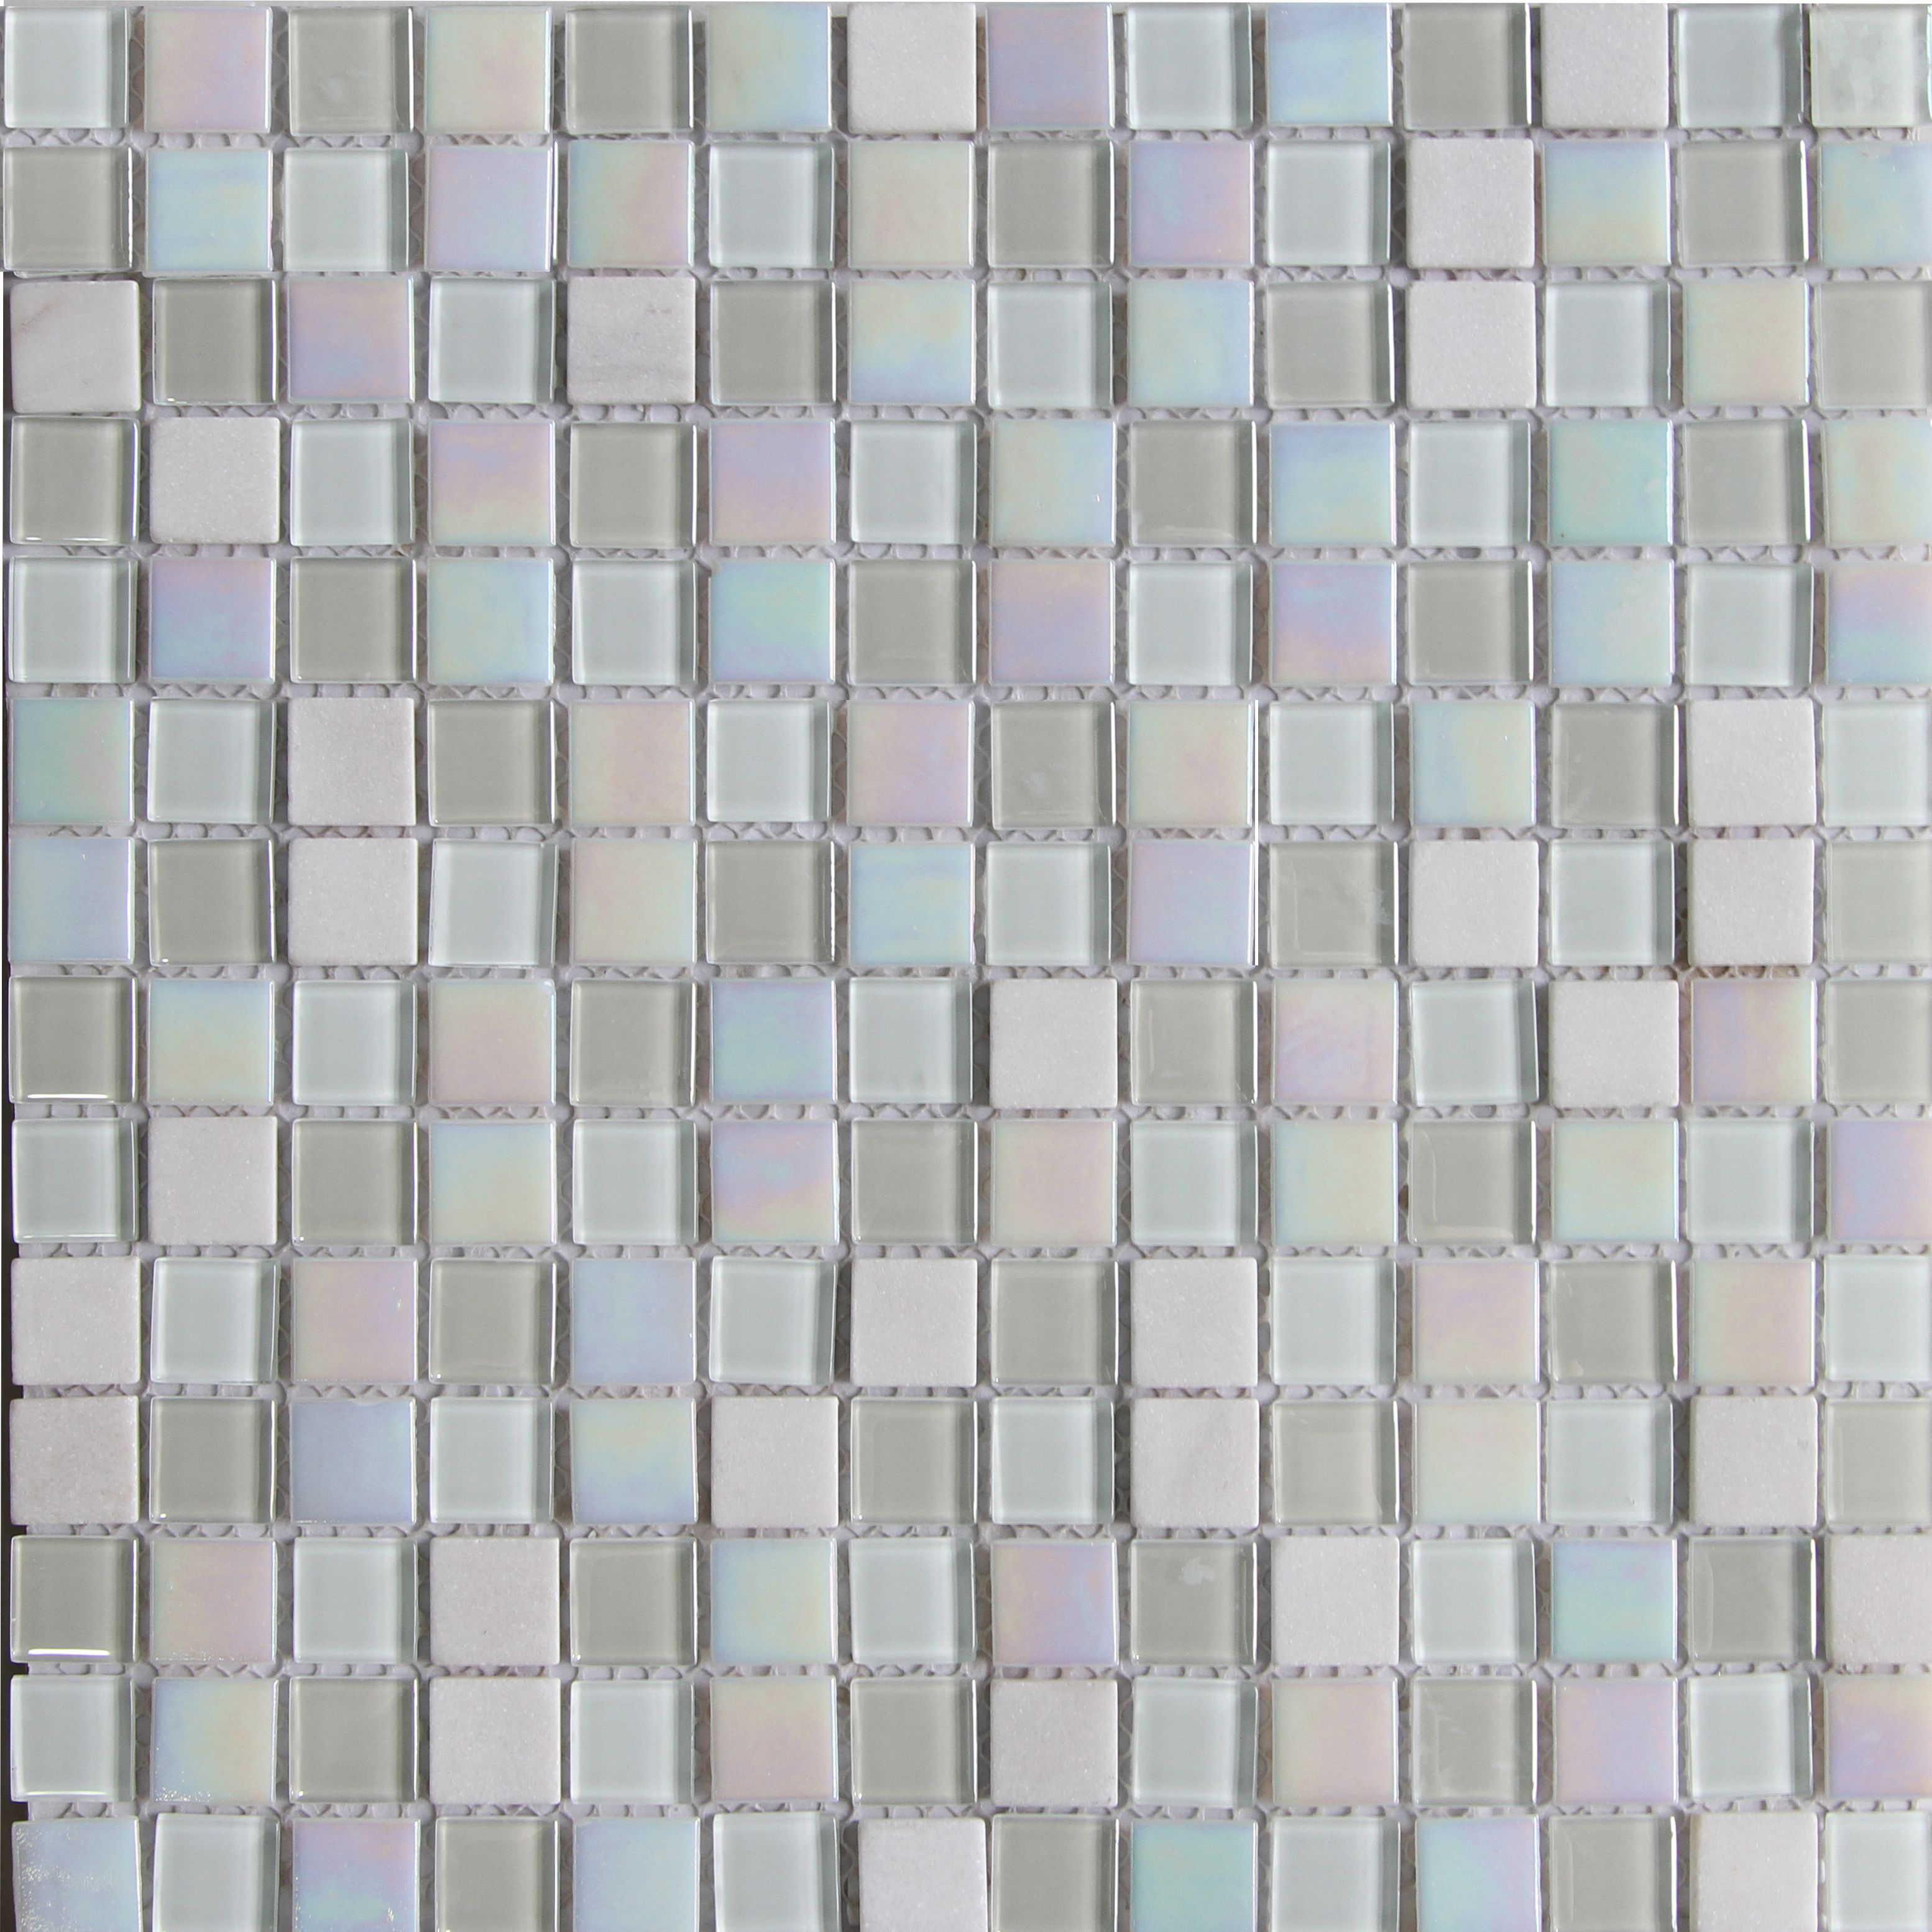 Parmia White Gloss Glass effect Mosaic Glass & marble Mosaic tile, (L)300mm (W)300mm